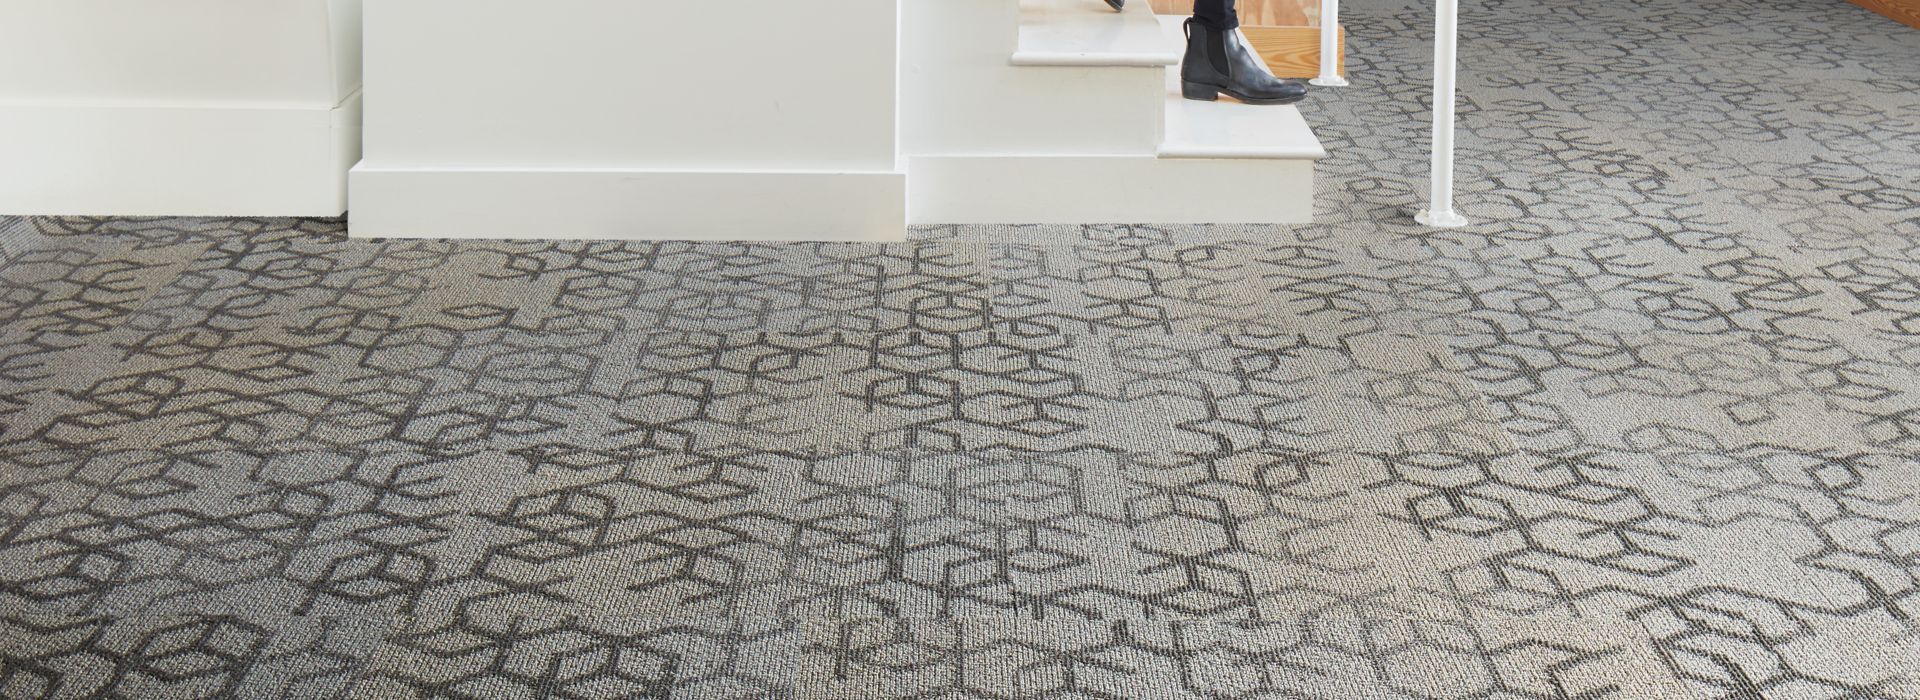 Interface Honey Do carpet tile with woman walking down open stairway and looking back